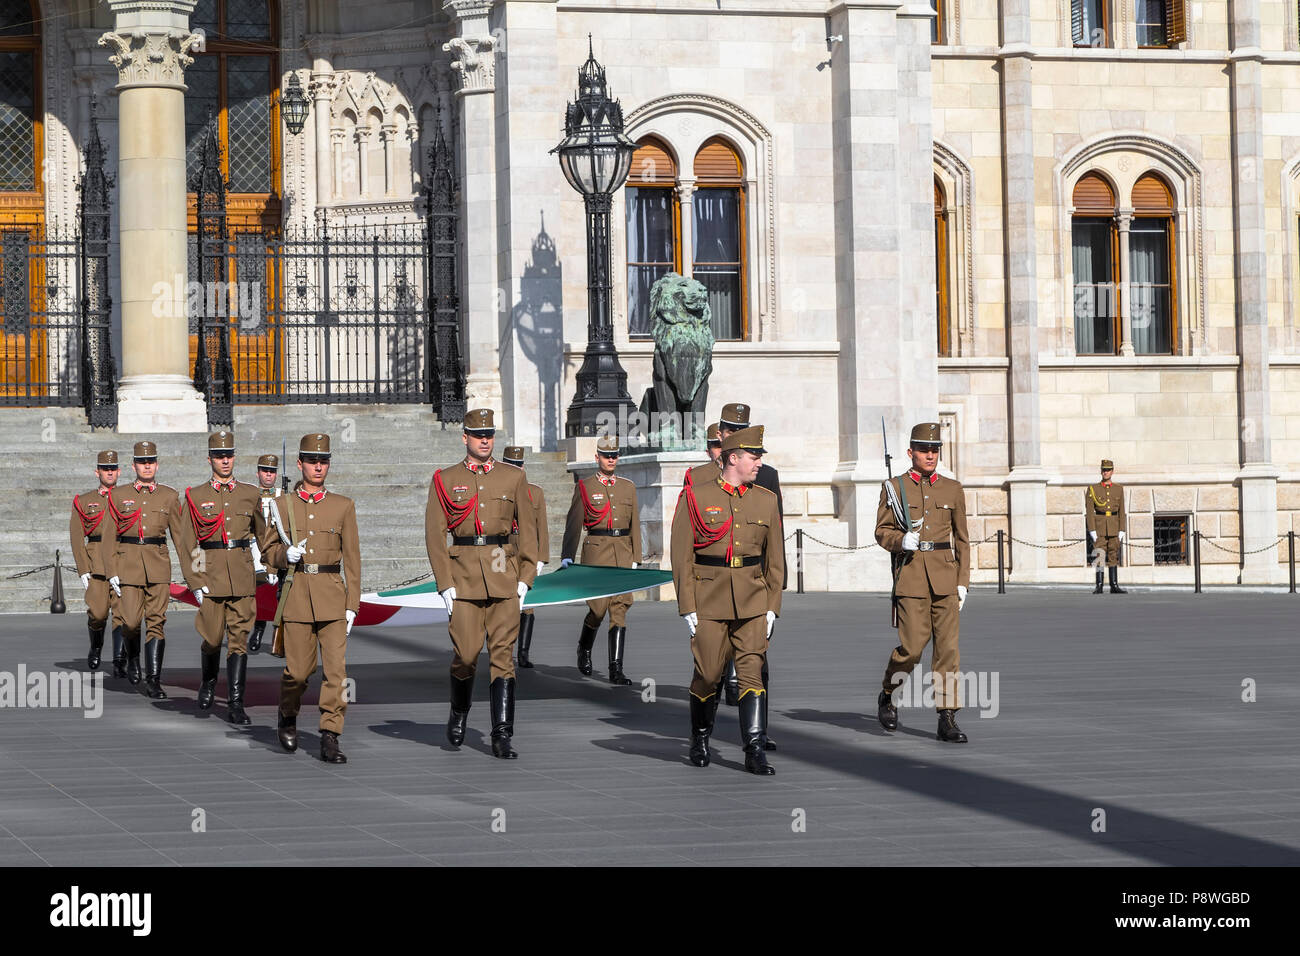 BUDAPEST, HUNGARY - May 5, 2014: The ceremony of raising the national flag in front of the Hungarian parliament in Budapest Stock Photo